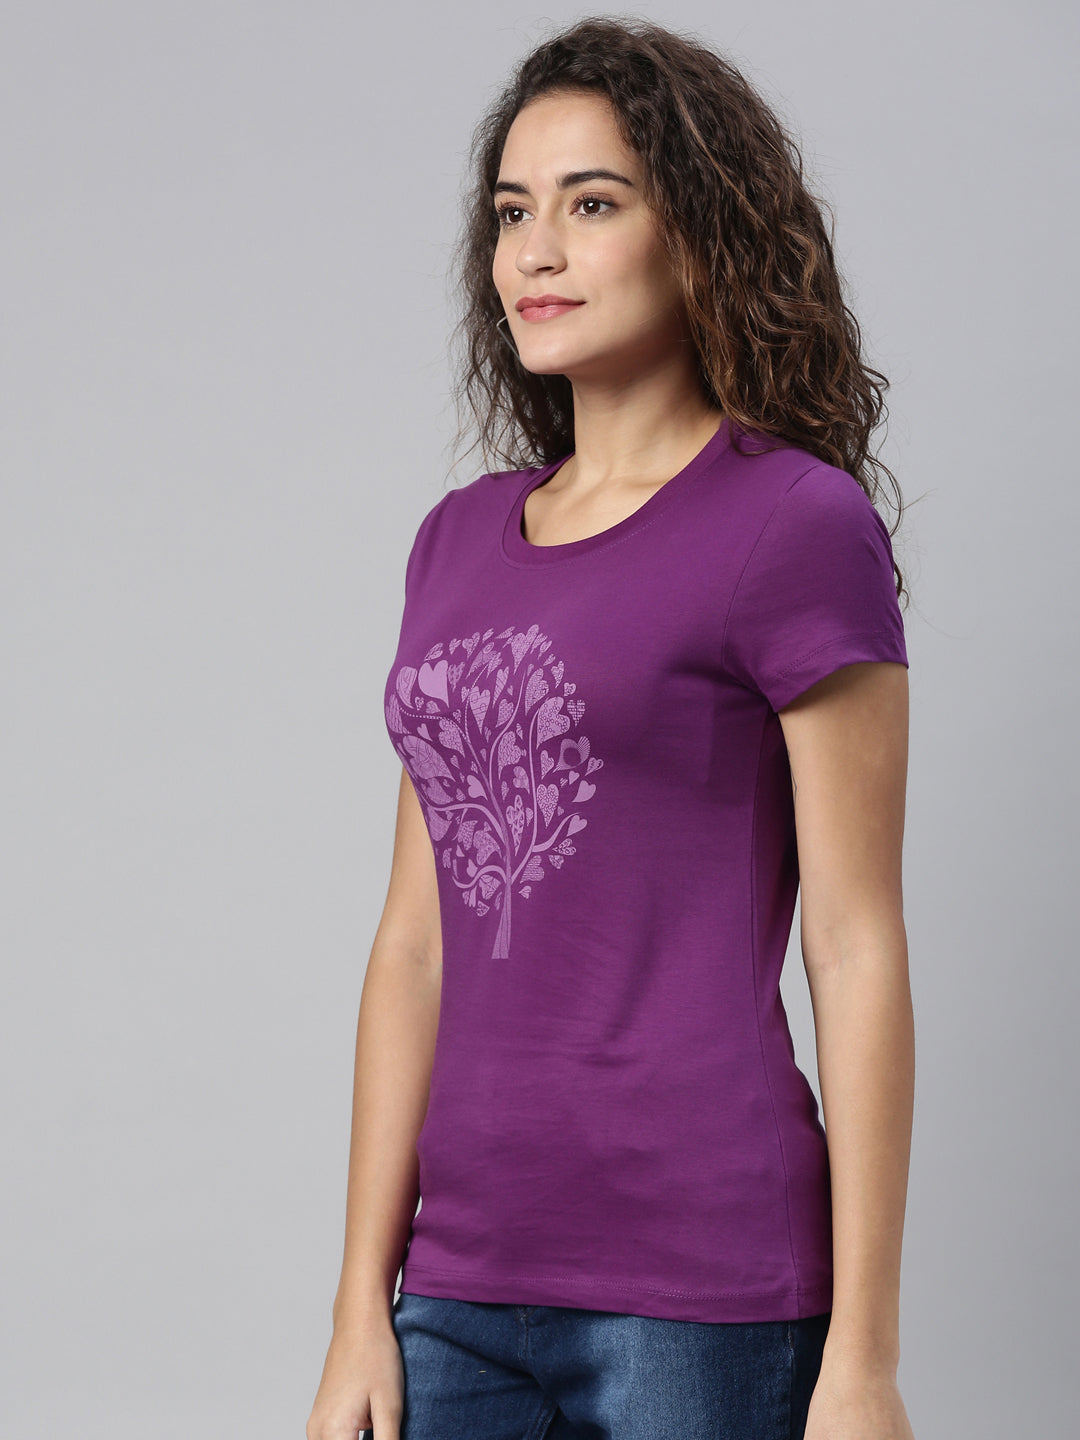 SUNRISE (100% COTTON CASUAL FIT T-SHIRT FOR WOMENS)